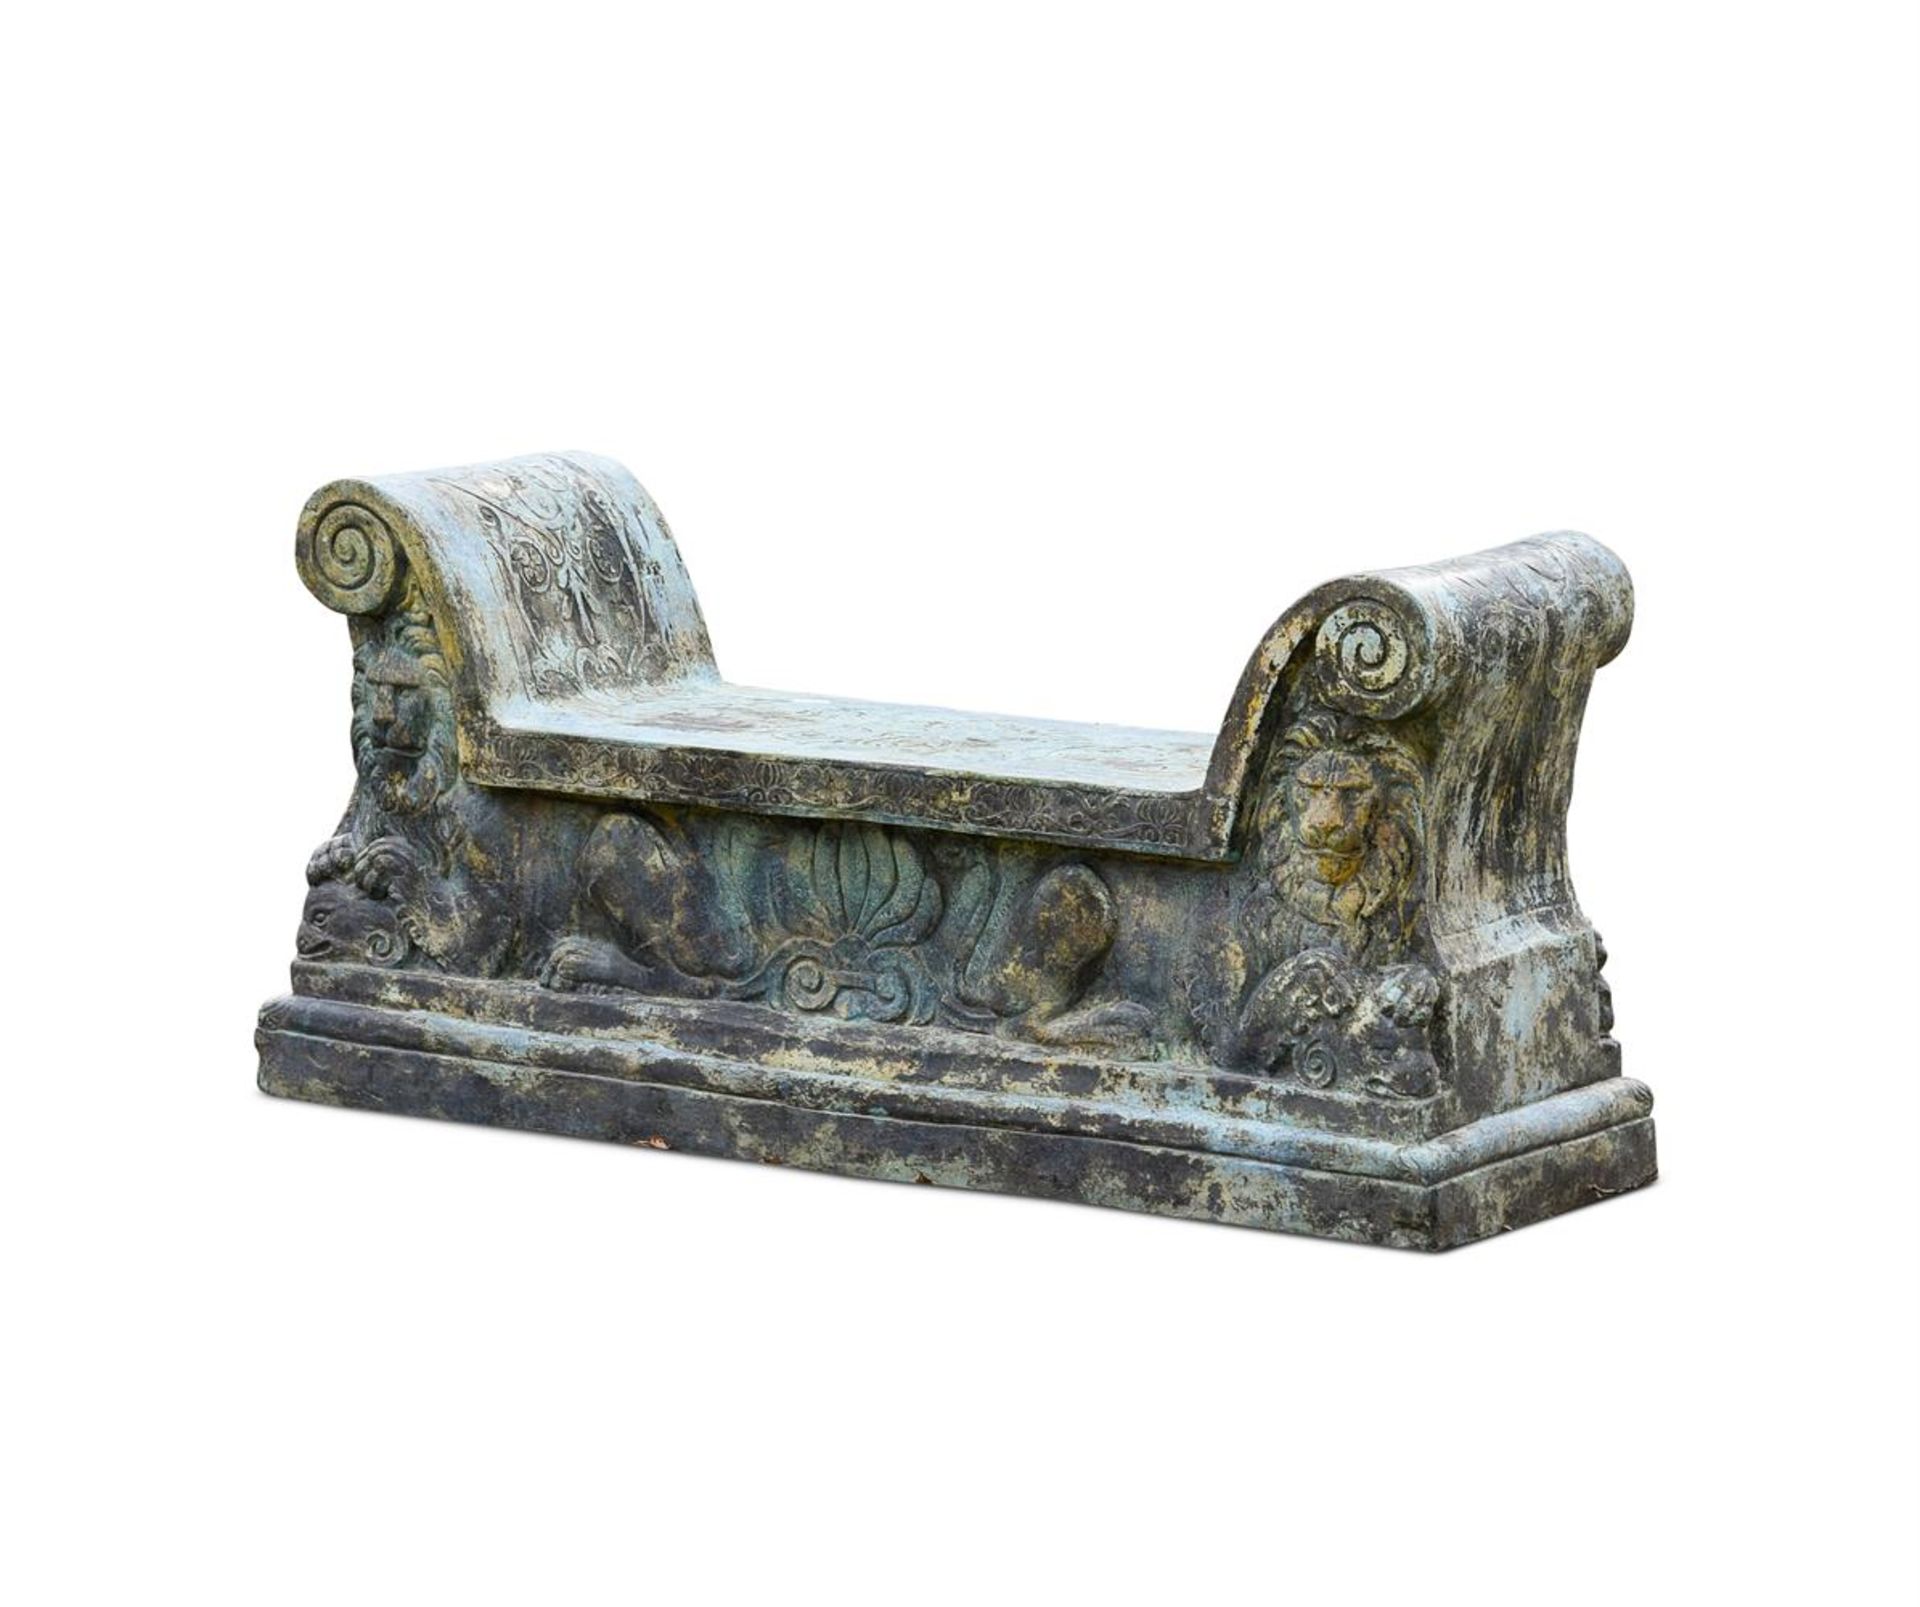 AFTER THE ITALIAN ANTIQUE, A VERDIGRIS PATINATED BRONZE BENCH LATE 20TH CENTURY - Image 2 of 2